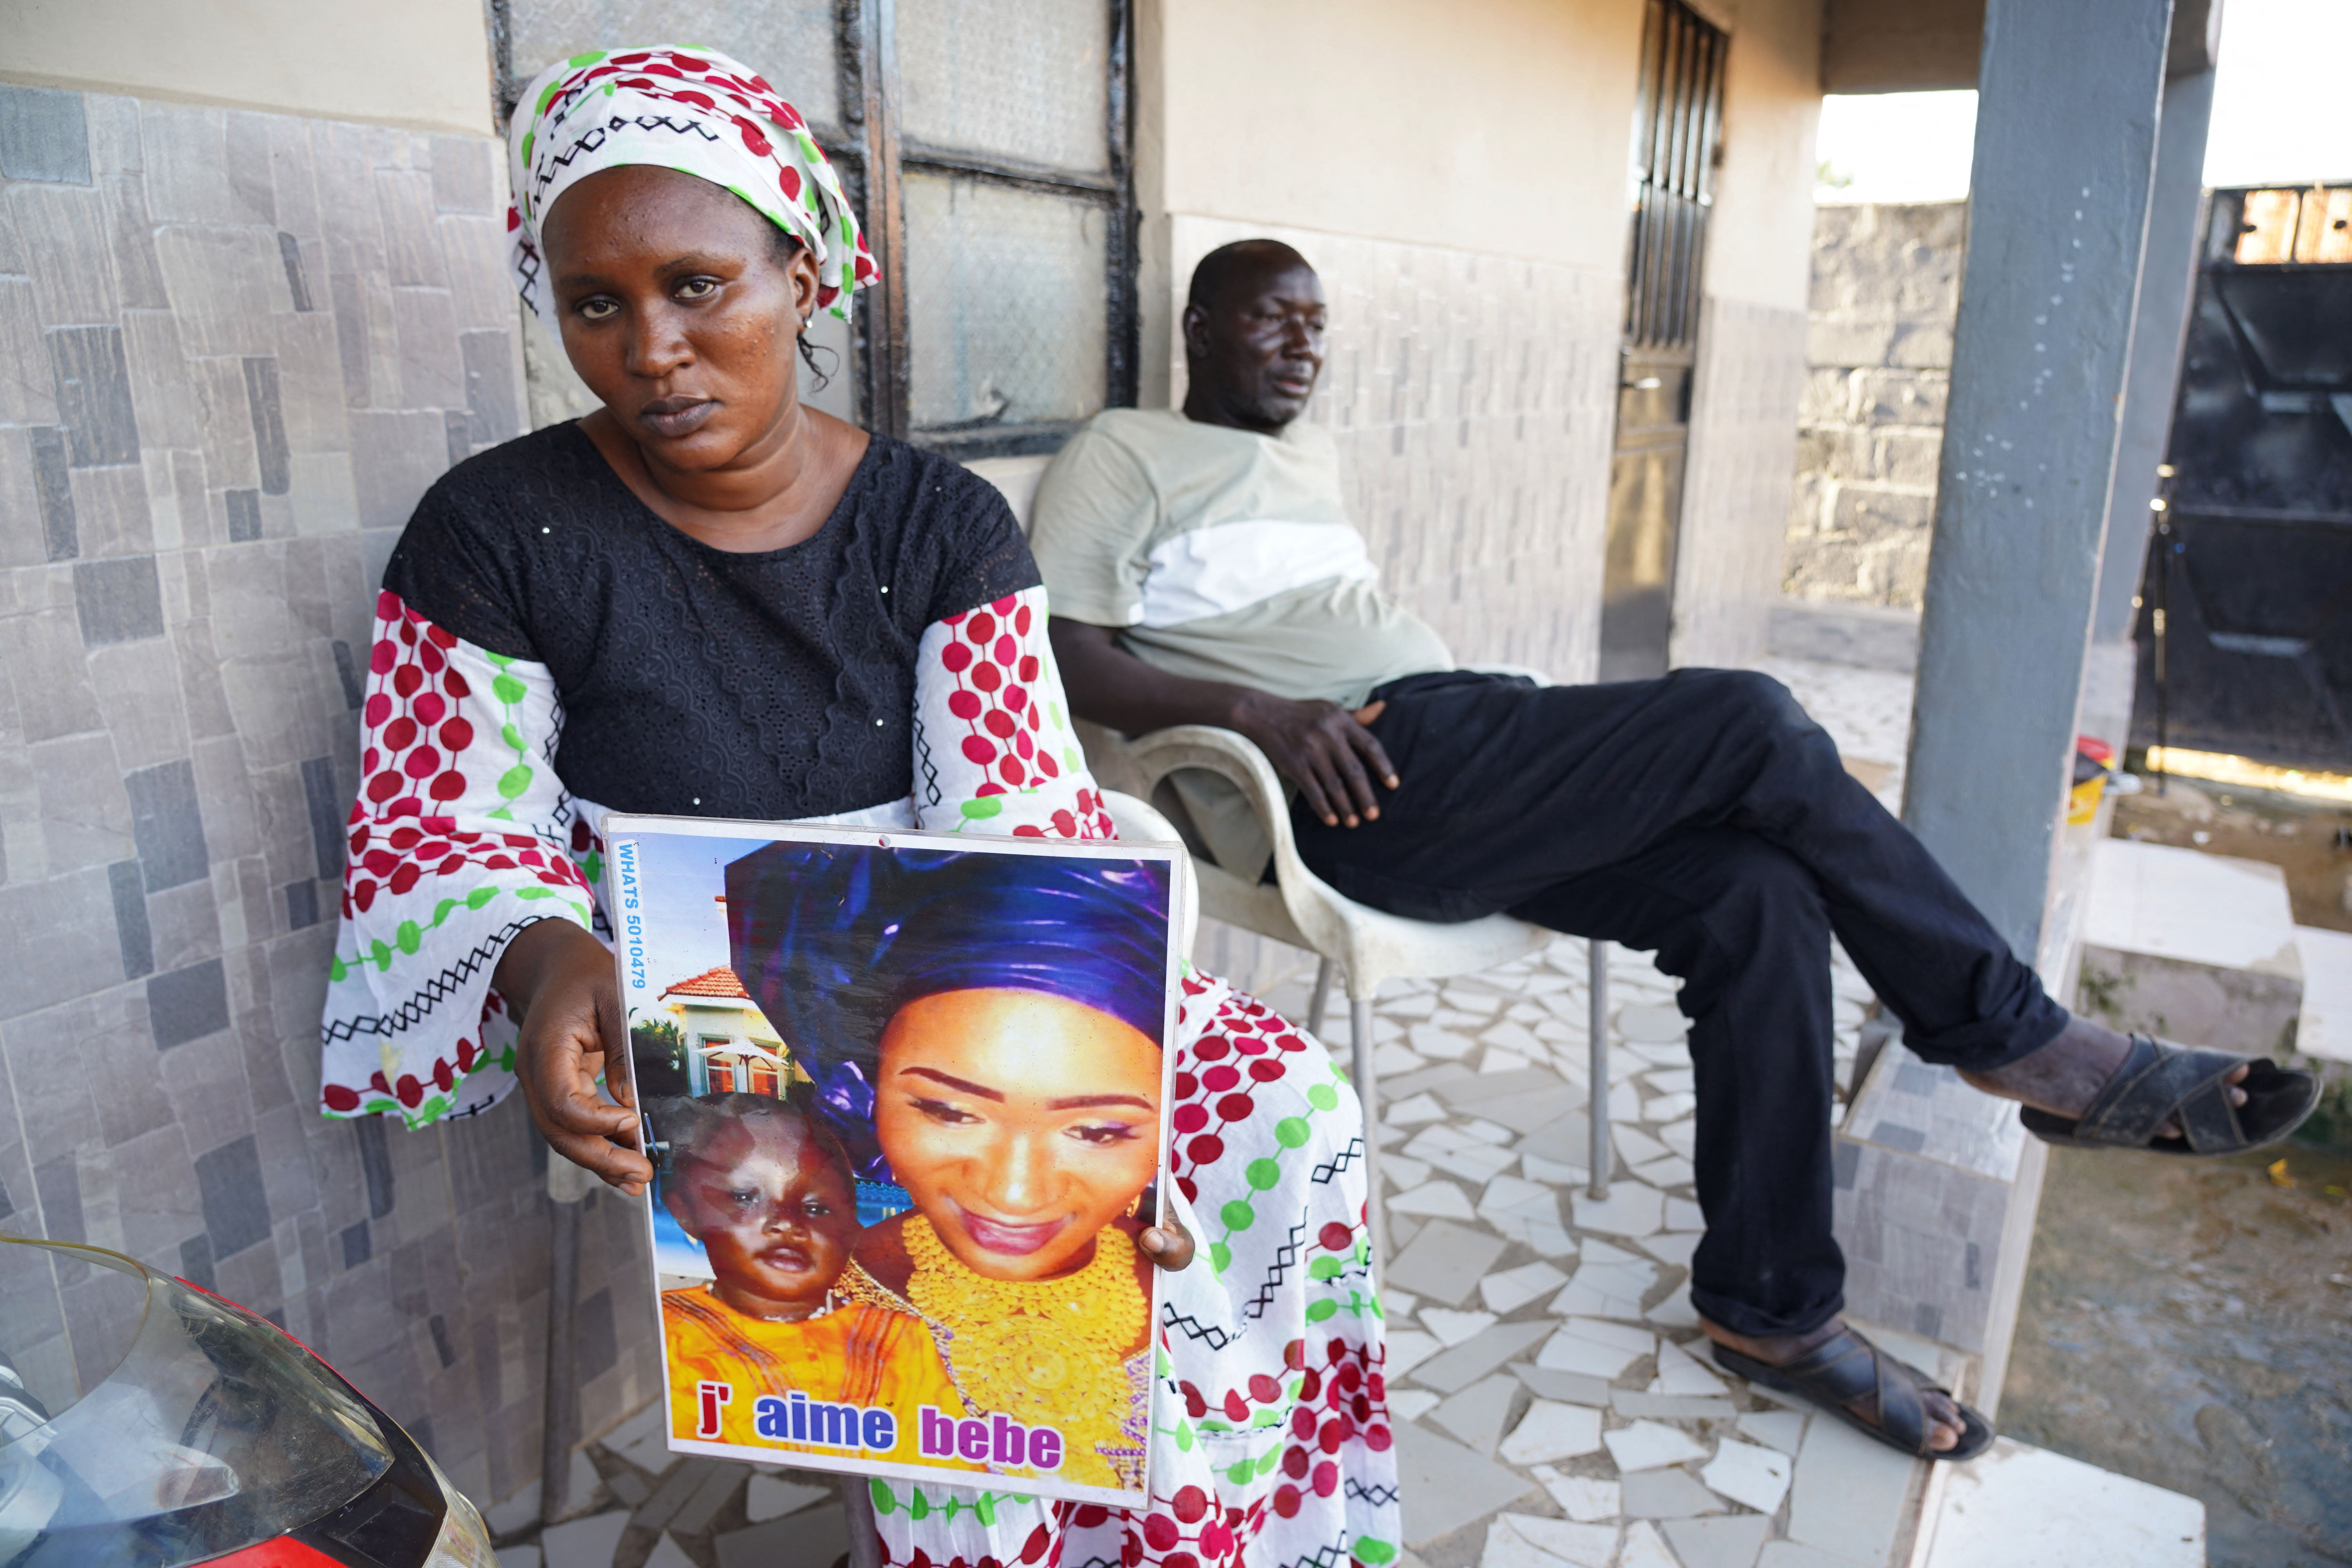 Mariama Kuyateh, 30, holds up a picture of her late son Musawho died from acute kidney failure, in The Gambia’s capital Banjul